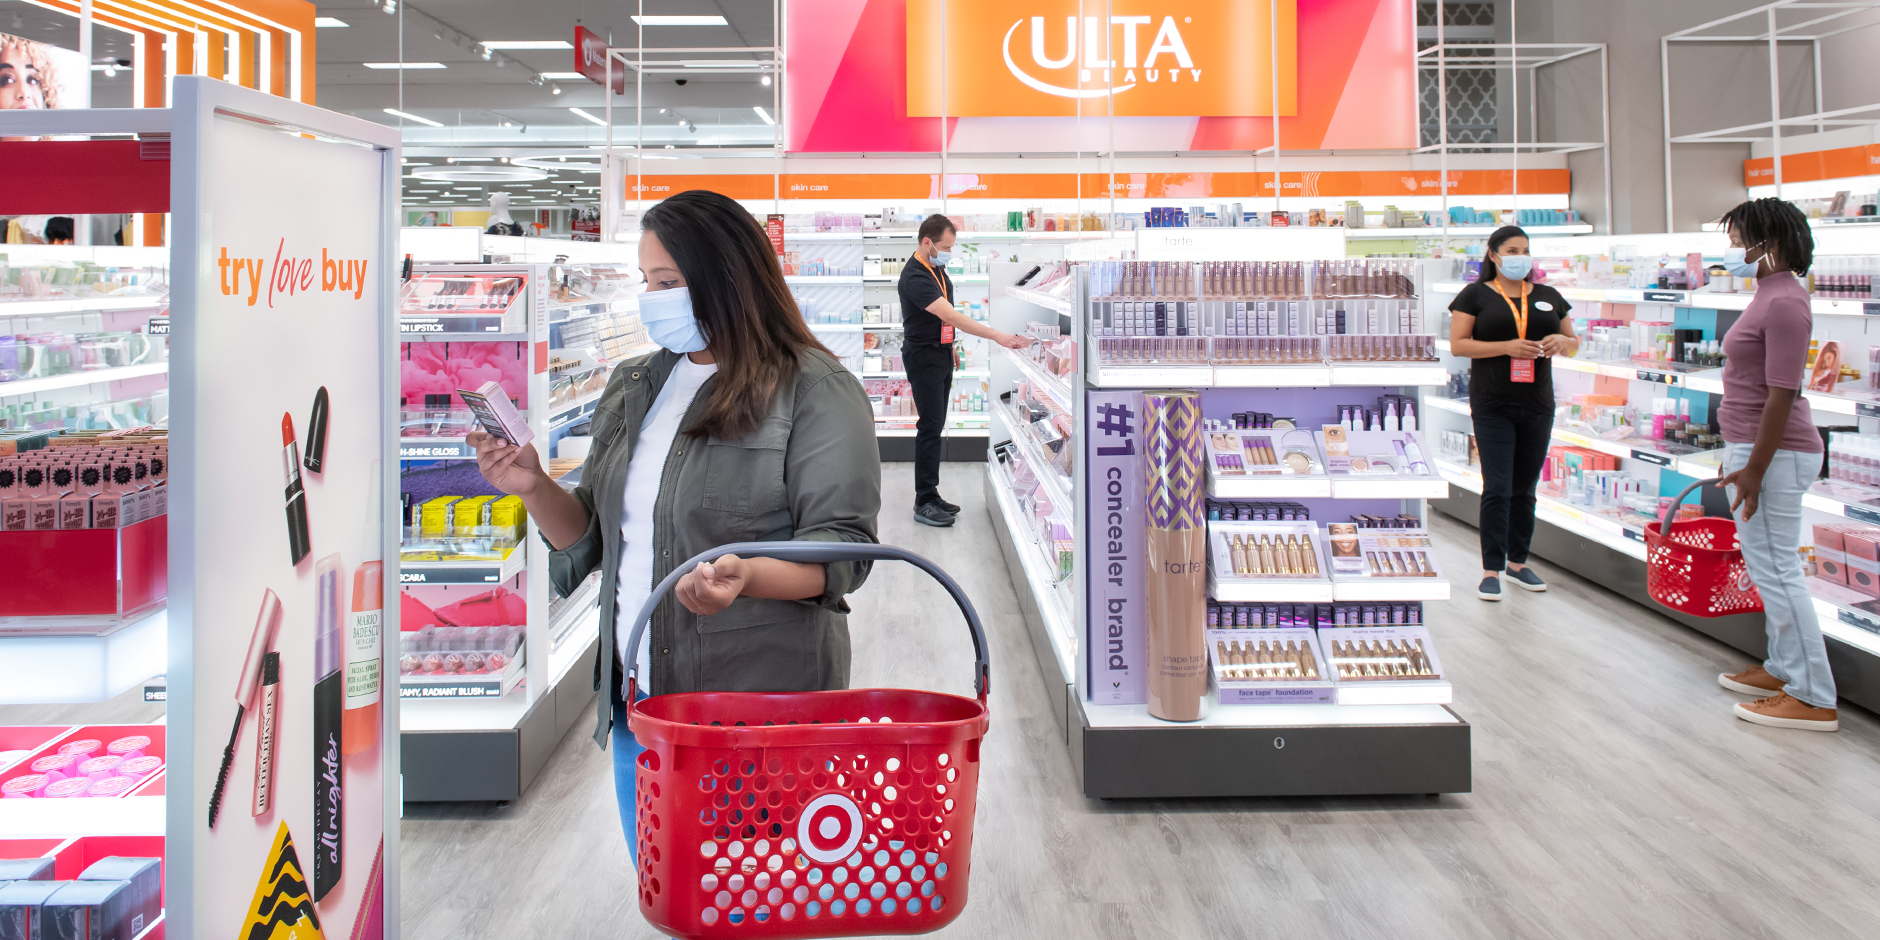 Retail Cosmetic Stores Industry Looks To Expand Its Size